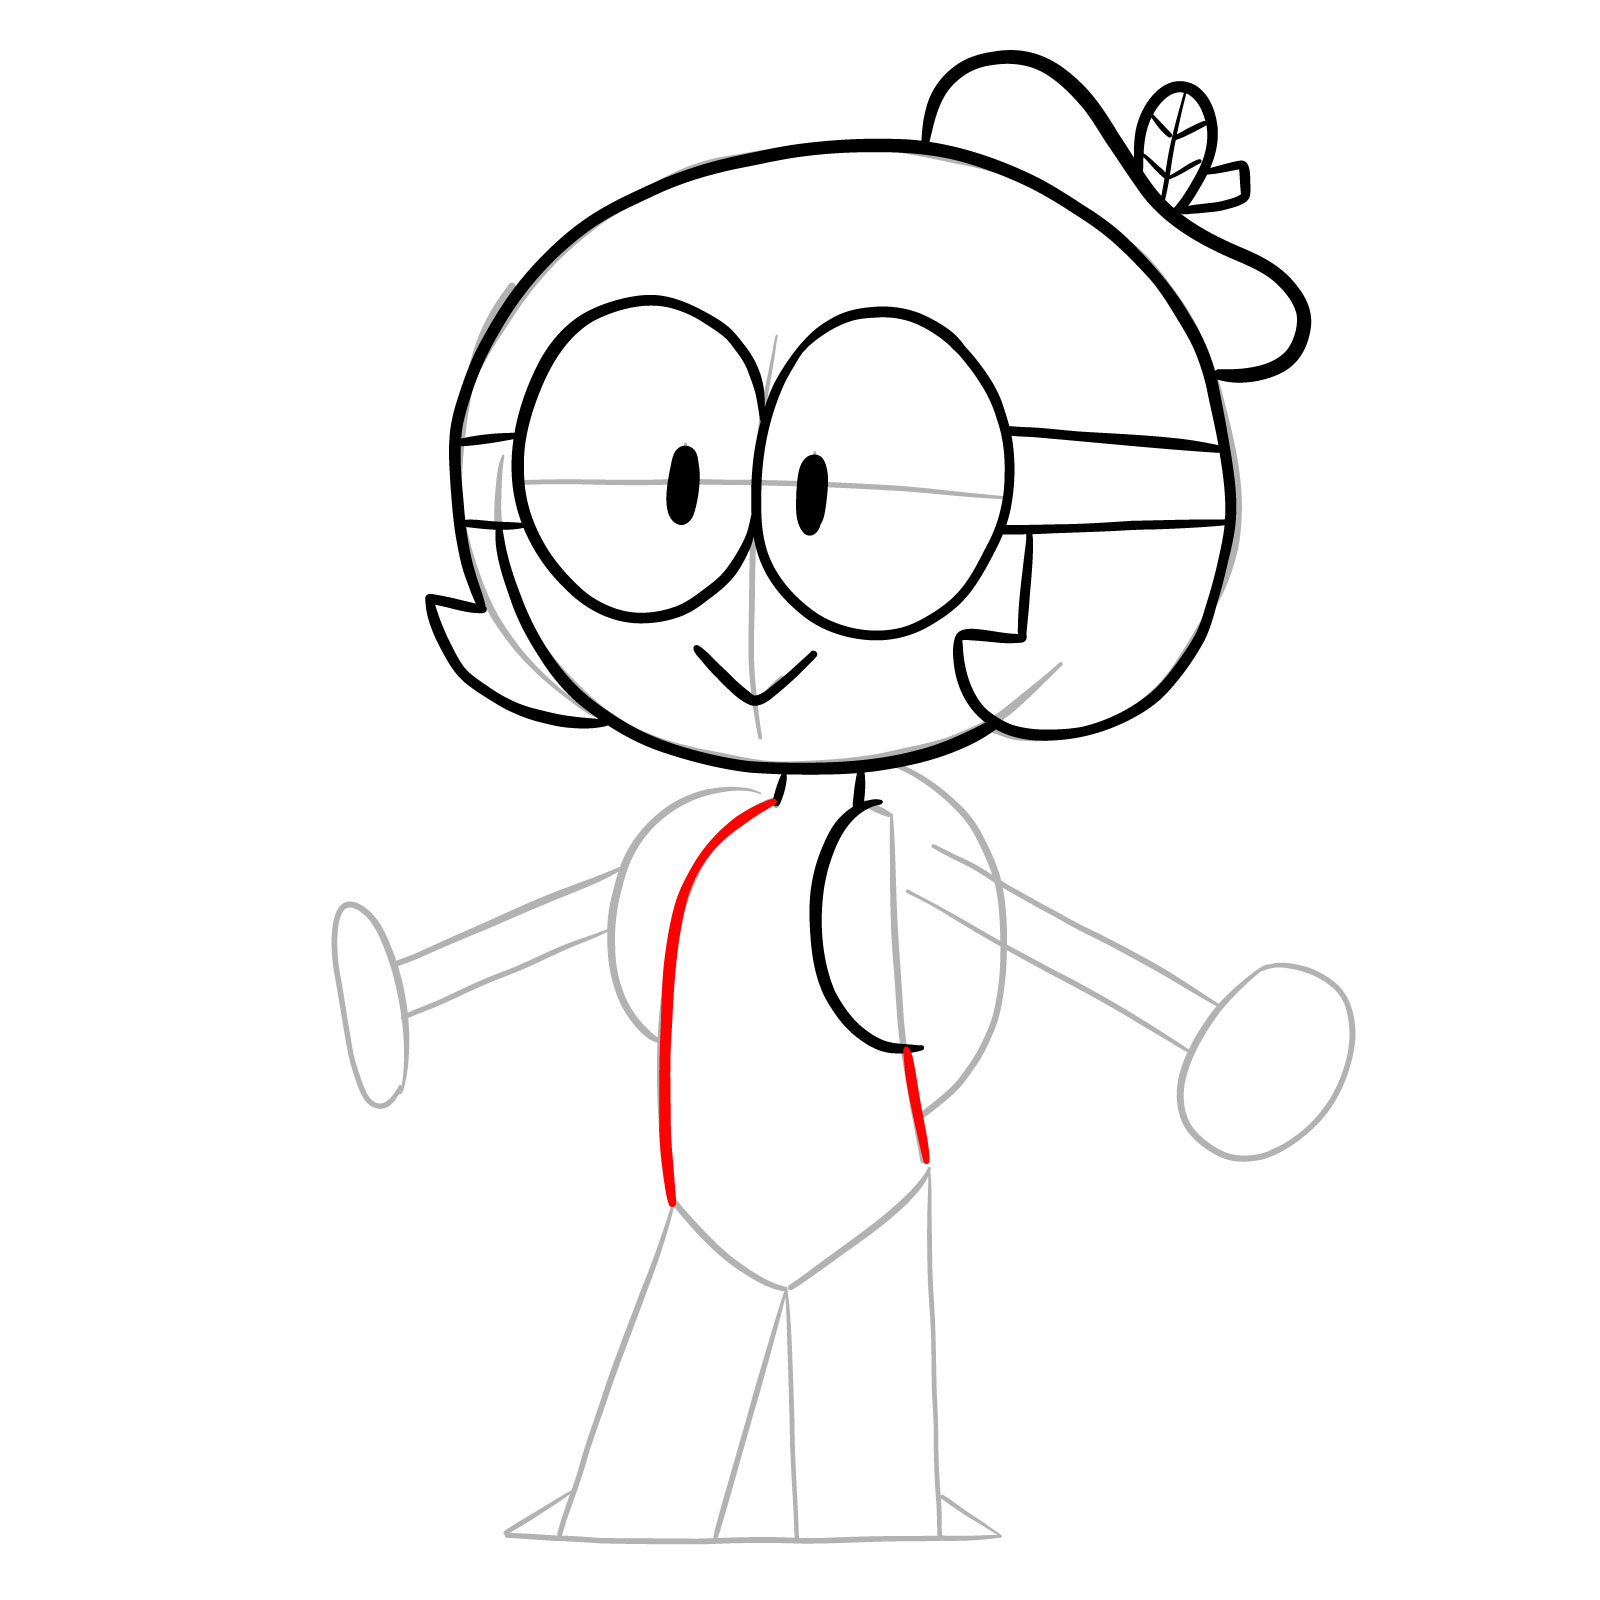 How to draw Dendy from OK K.O.! - step 12